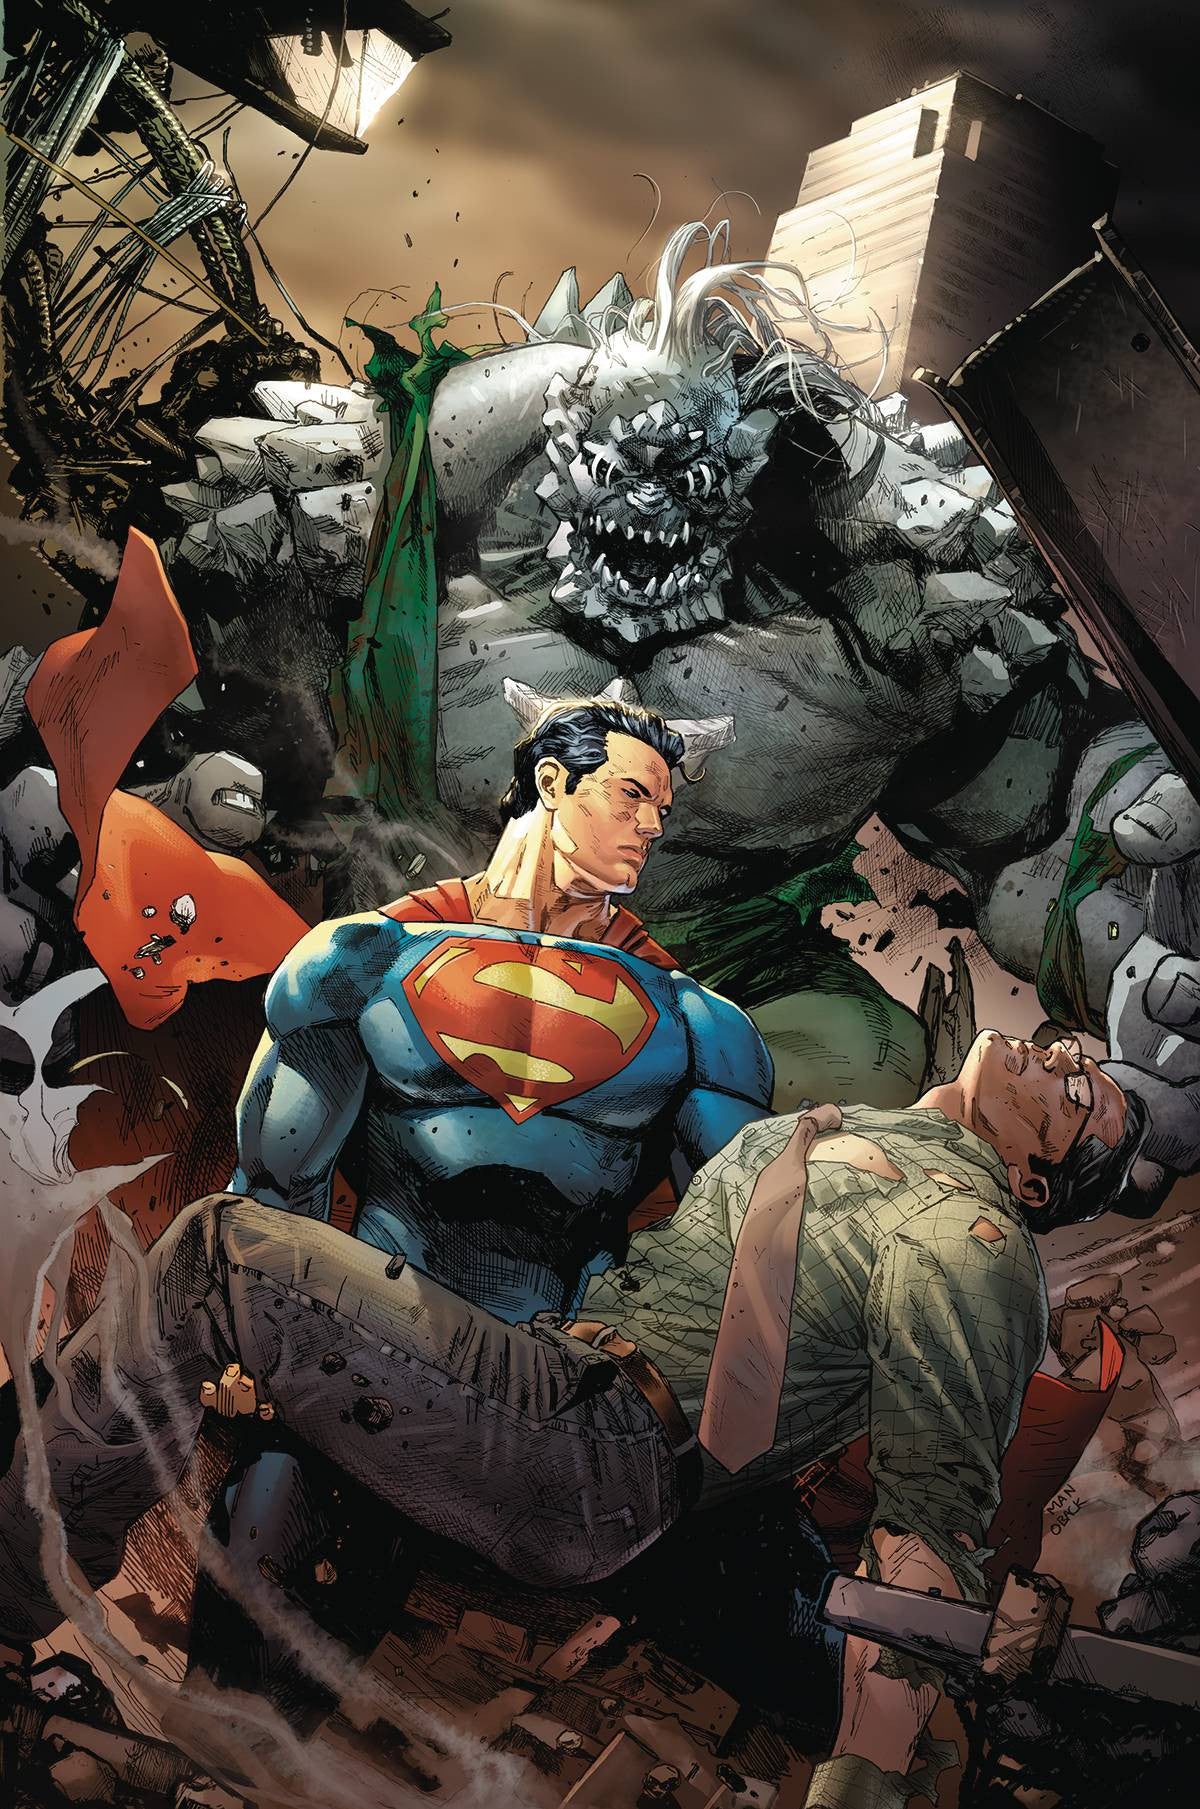 ACTION COMICS #959 COVER